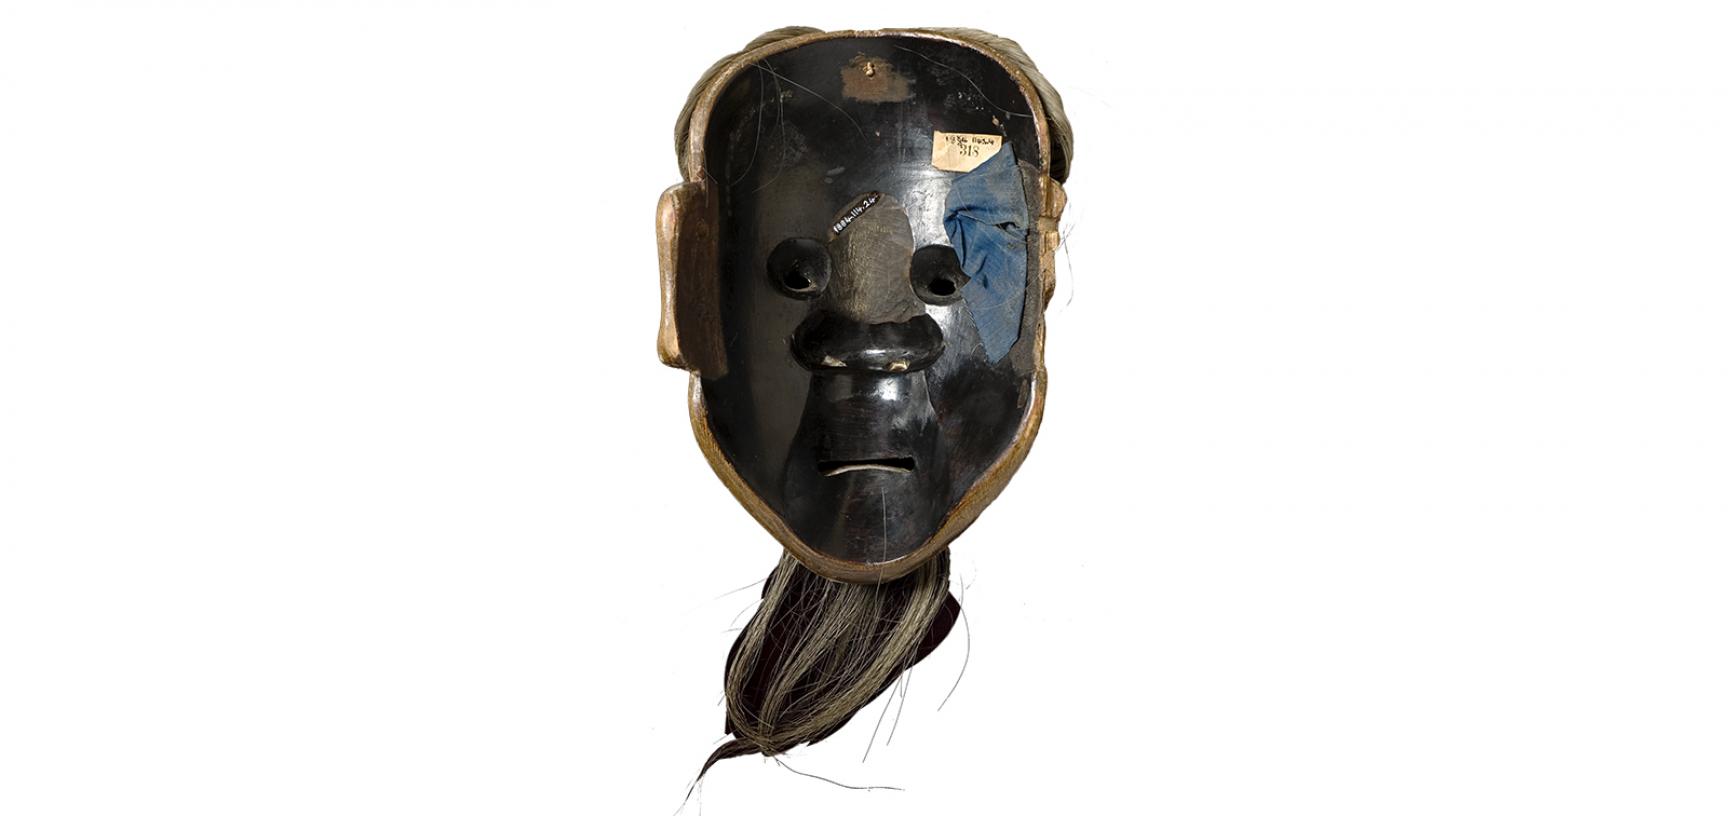 Reverse of mask (1184.112.24) after conservation - the back of the mask reveals additional carving to the bridge of the nose and textile padding on the cheek